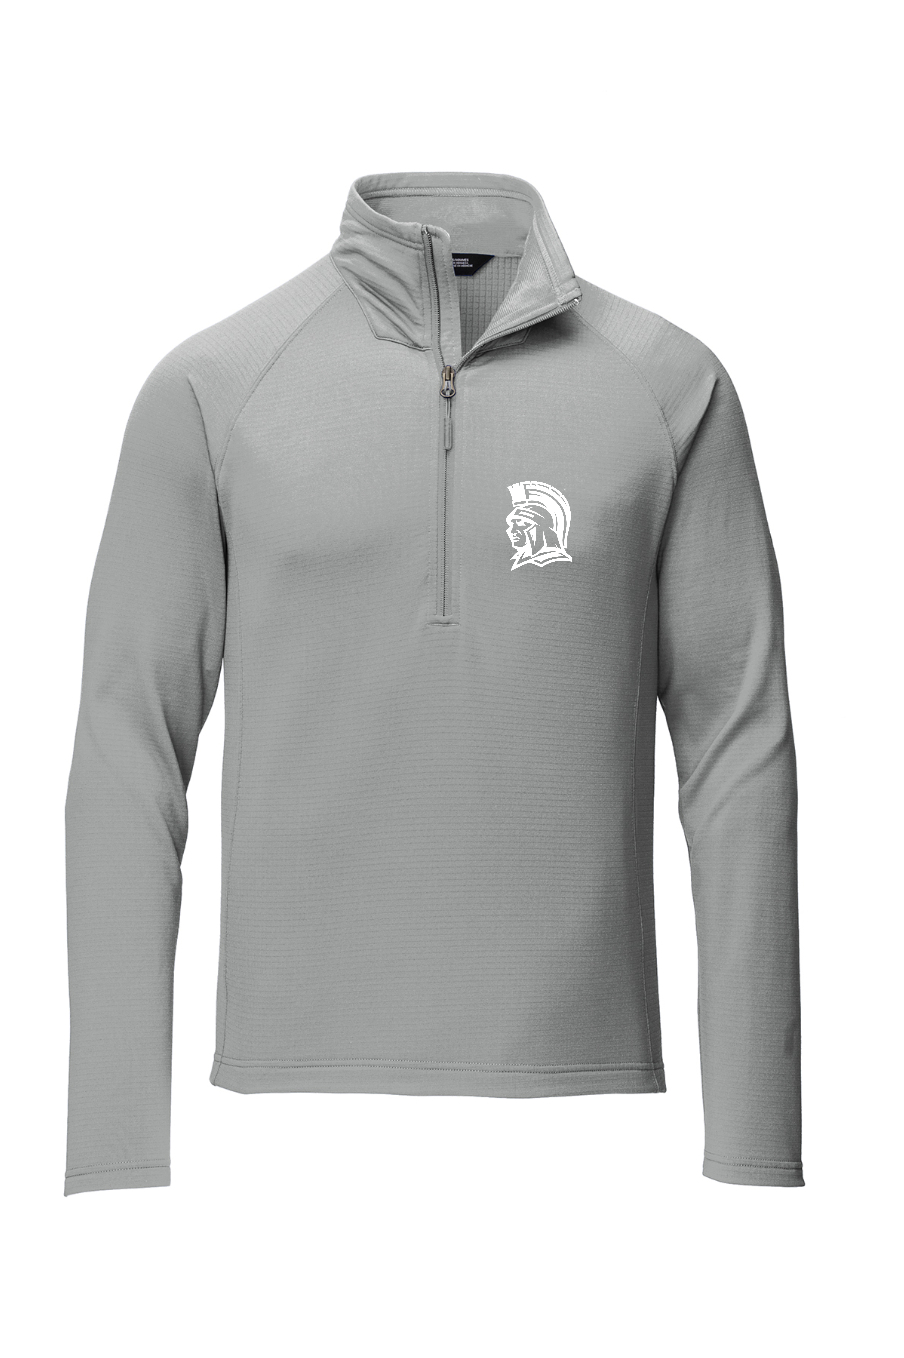 Chambersburg The North Face Peaks Quarter-Zip Pullover